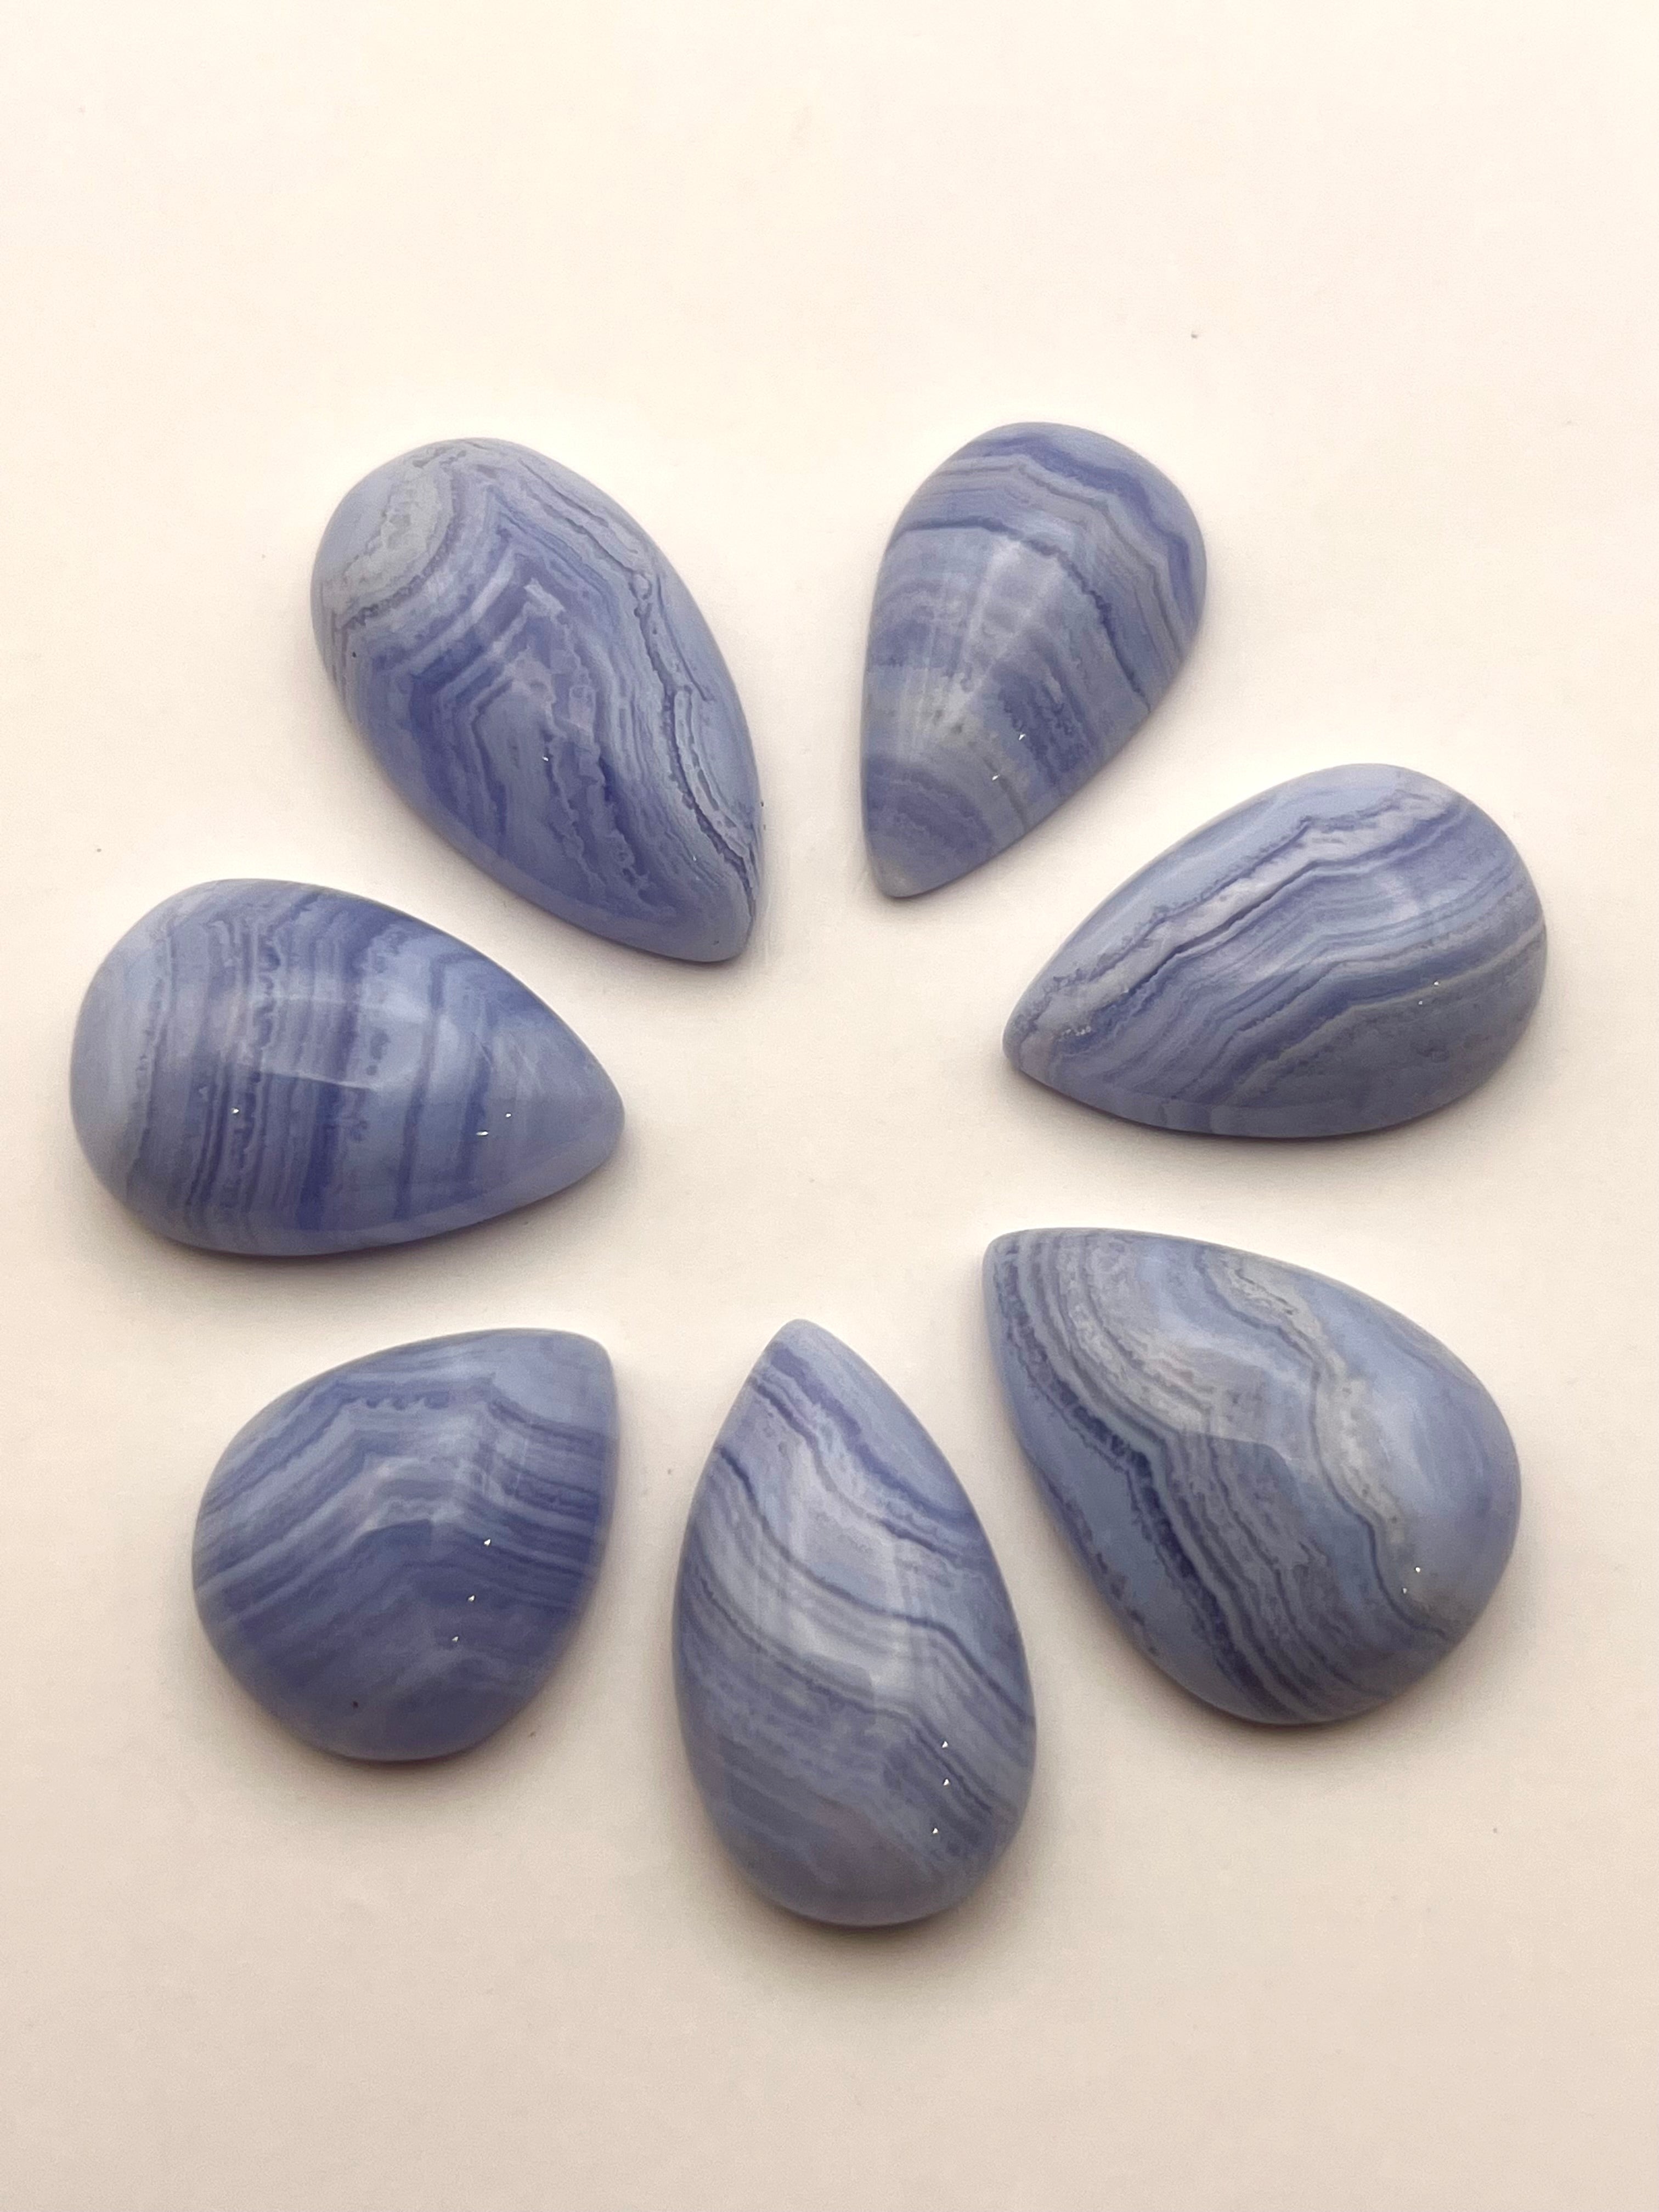 Blue Lace Agate Cabochon Intuitively Selected - Earthly Secrets